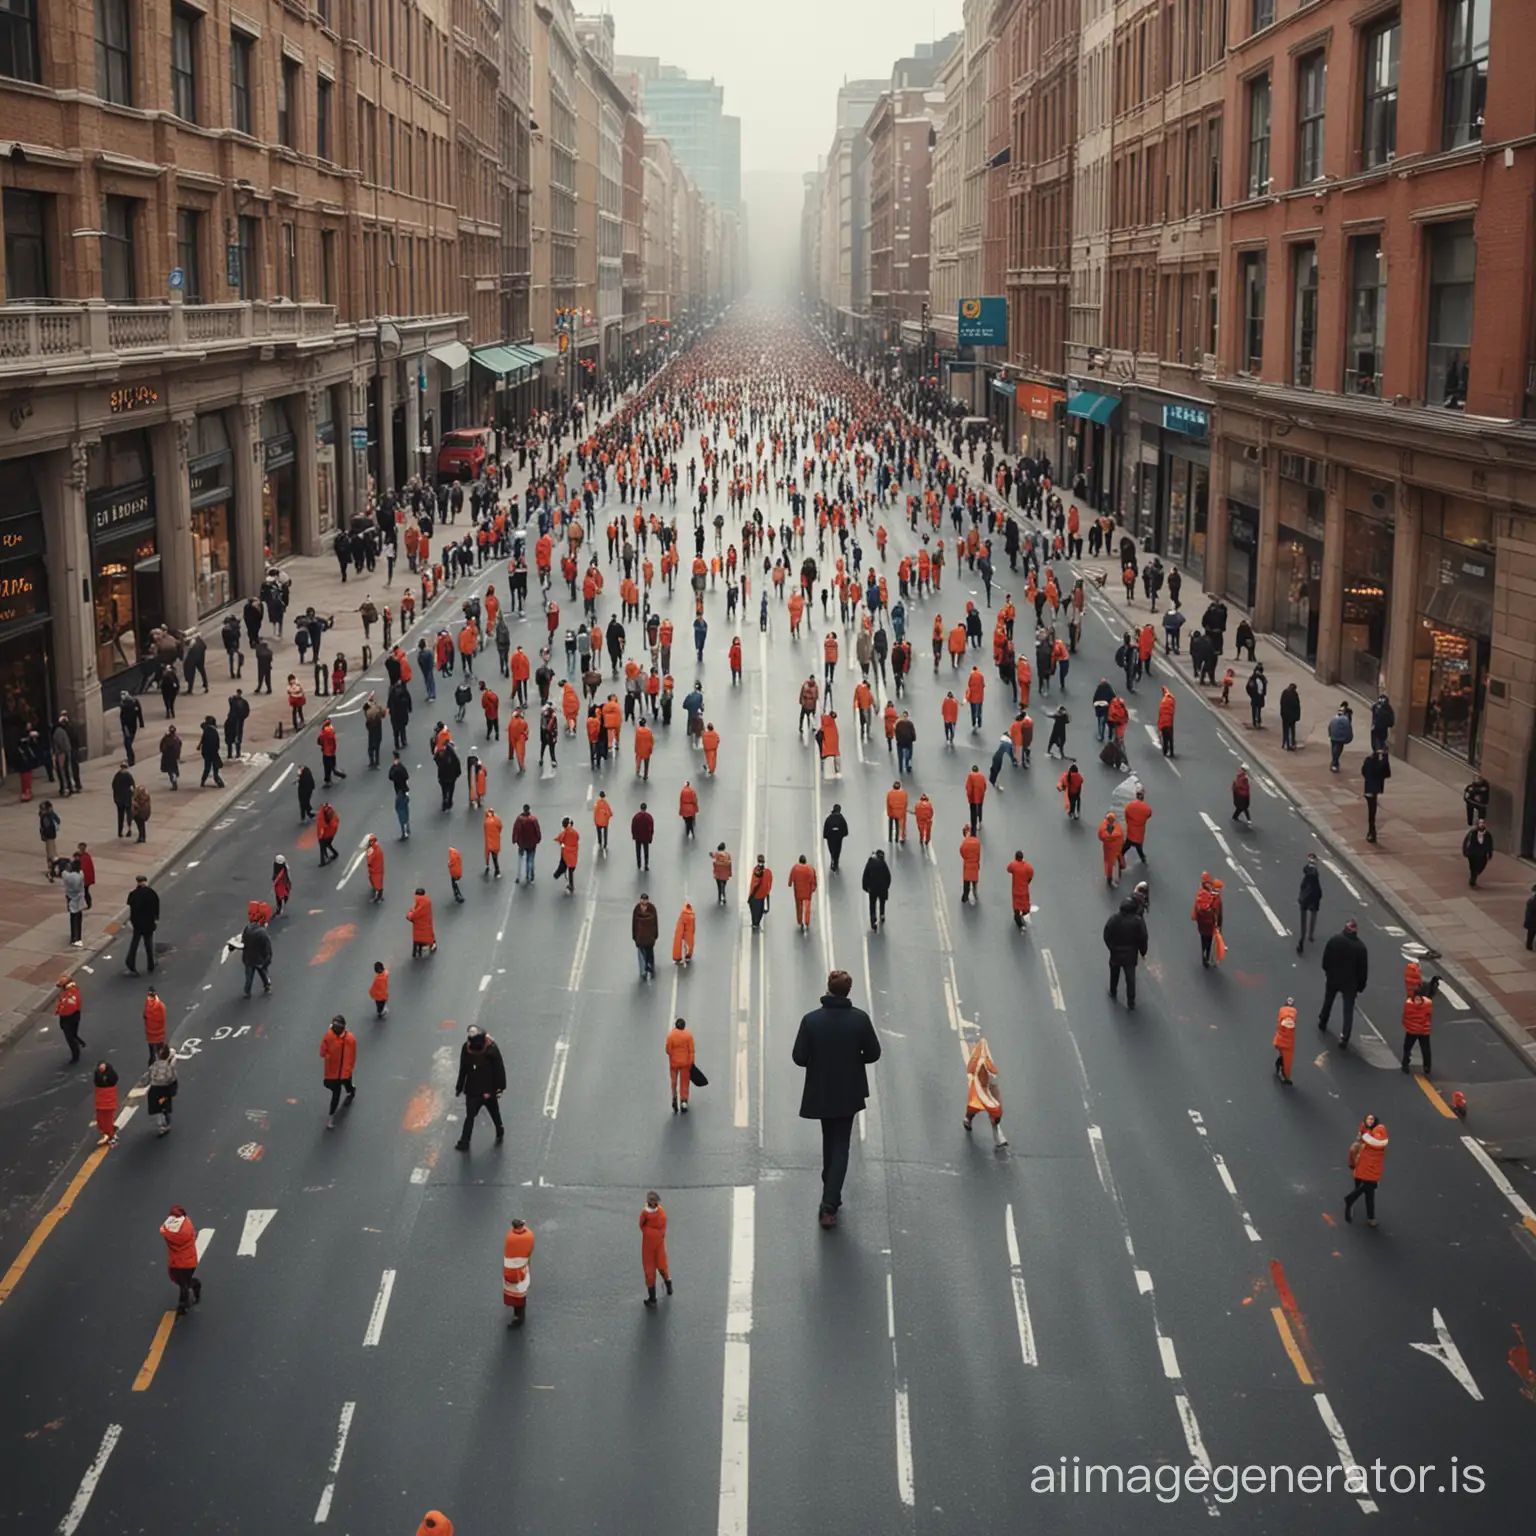 Urban-Exploration-Bustling-City-Scene-with-Pedestrians-and-Cars